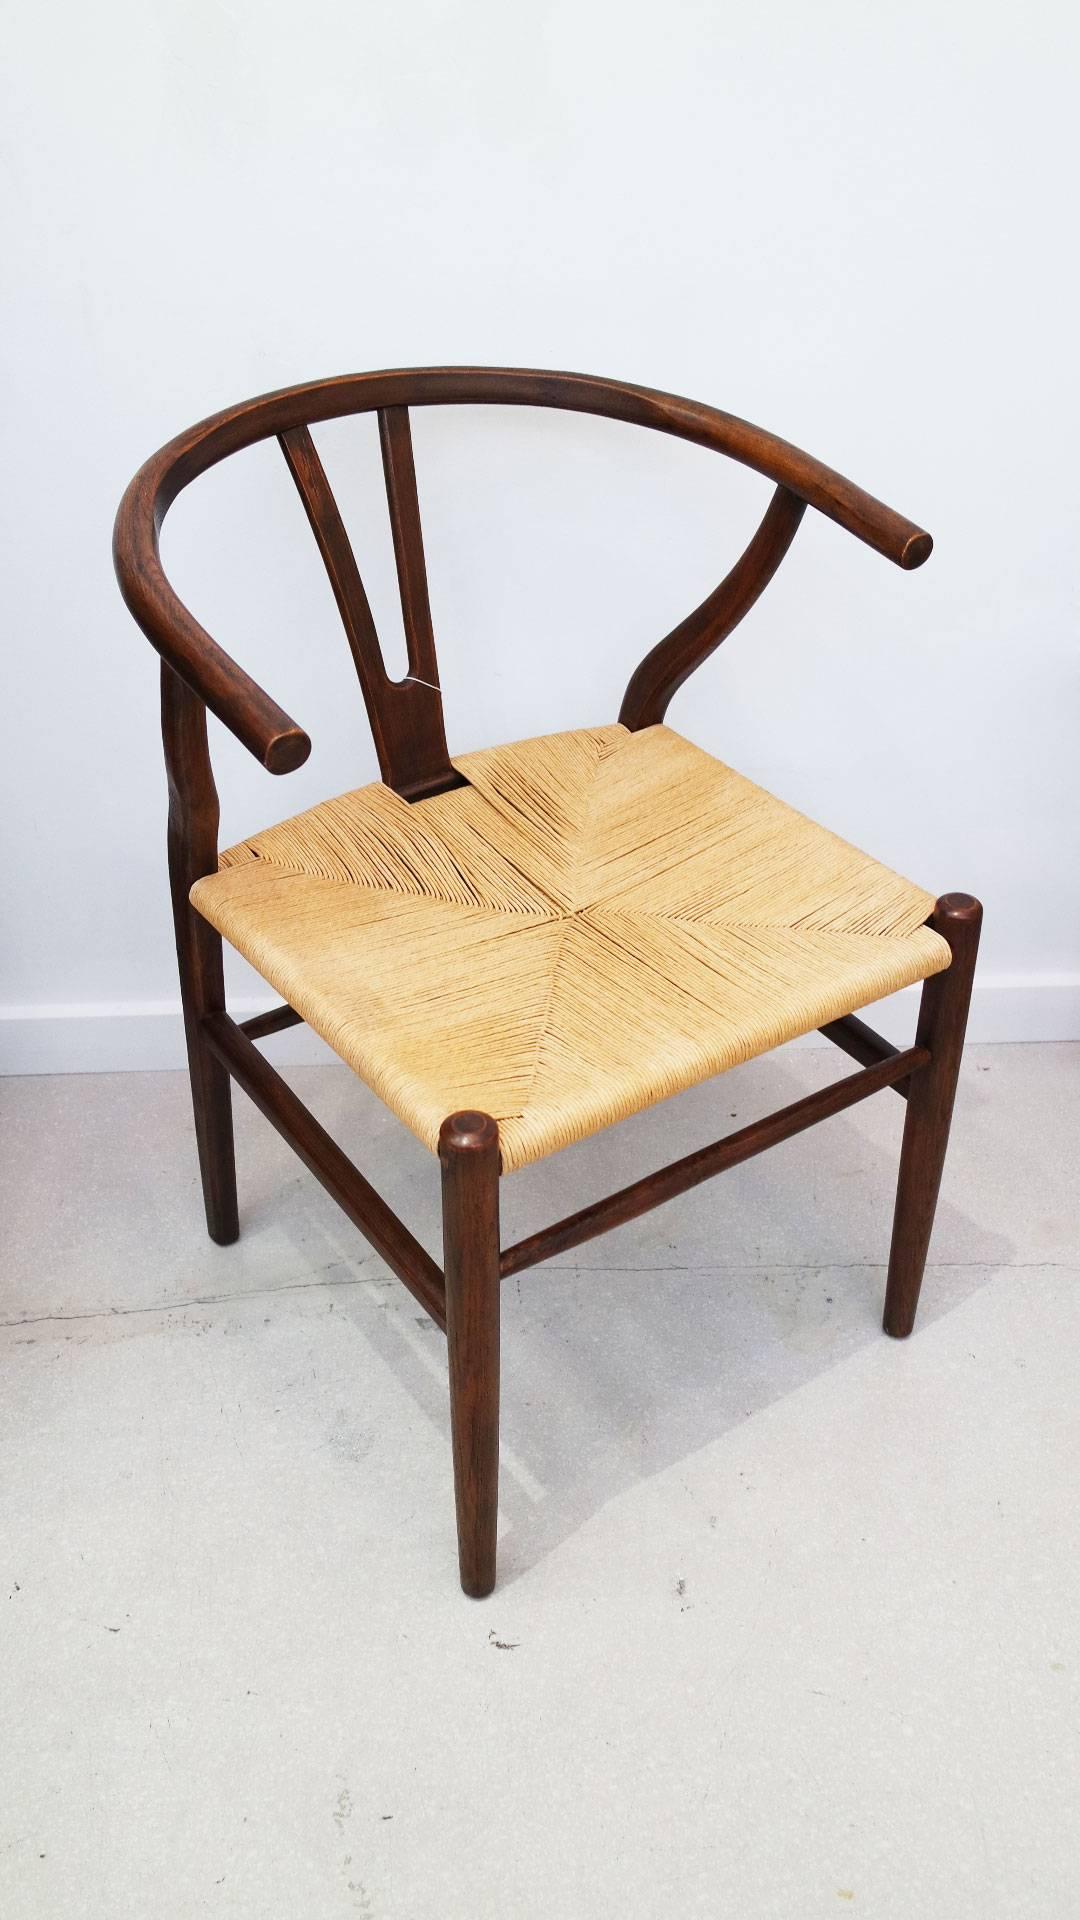 Single iconic Mid-Century Modern wishbone chair by Hans Wegner for Carl Hansen in tobacco stained oak with handwoven paper cord seat.